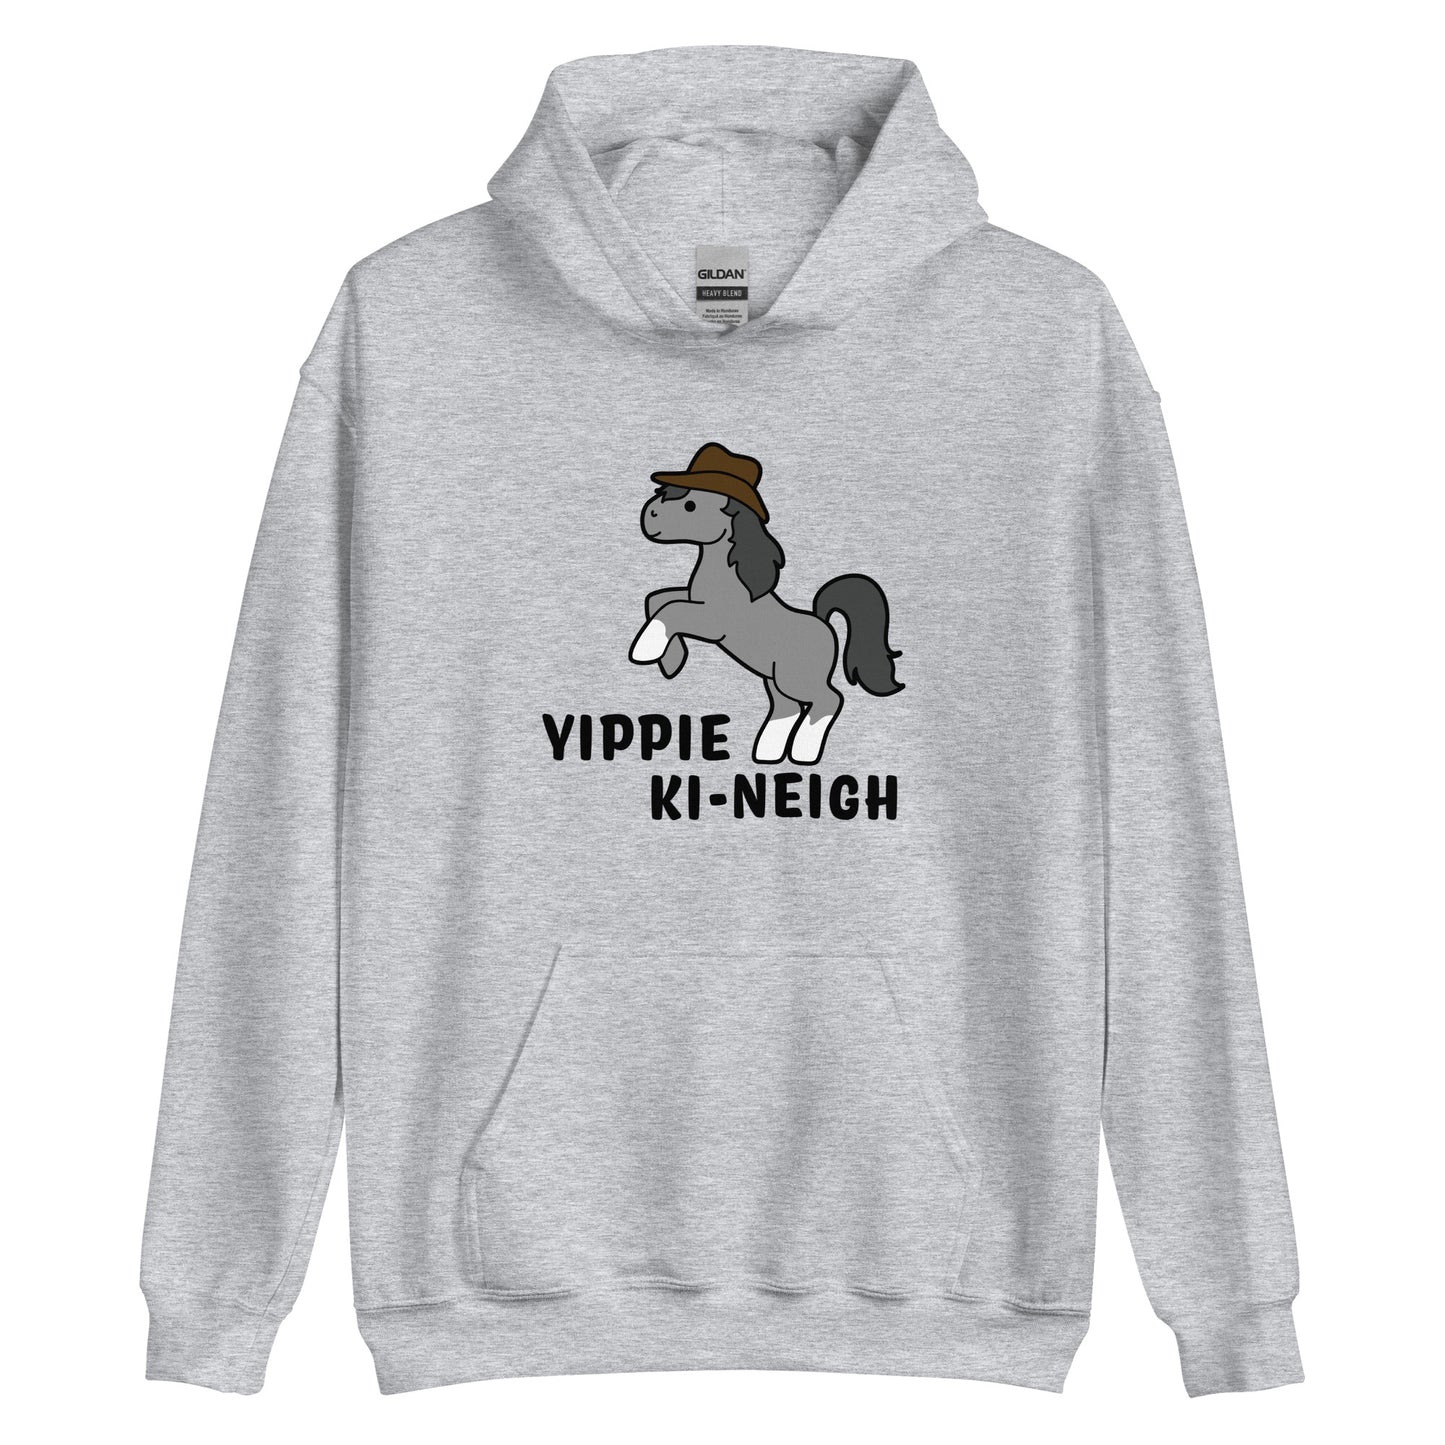 A grey hooded sweatshirt featuring an illustration of a smiling grey pony rearing and wearing a cowboy hat. Text underneath the pony reads "Yippie Ki-Neigh"